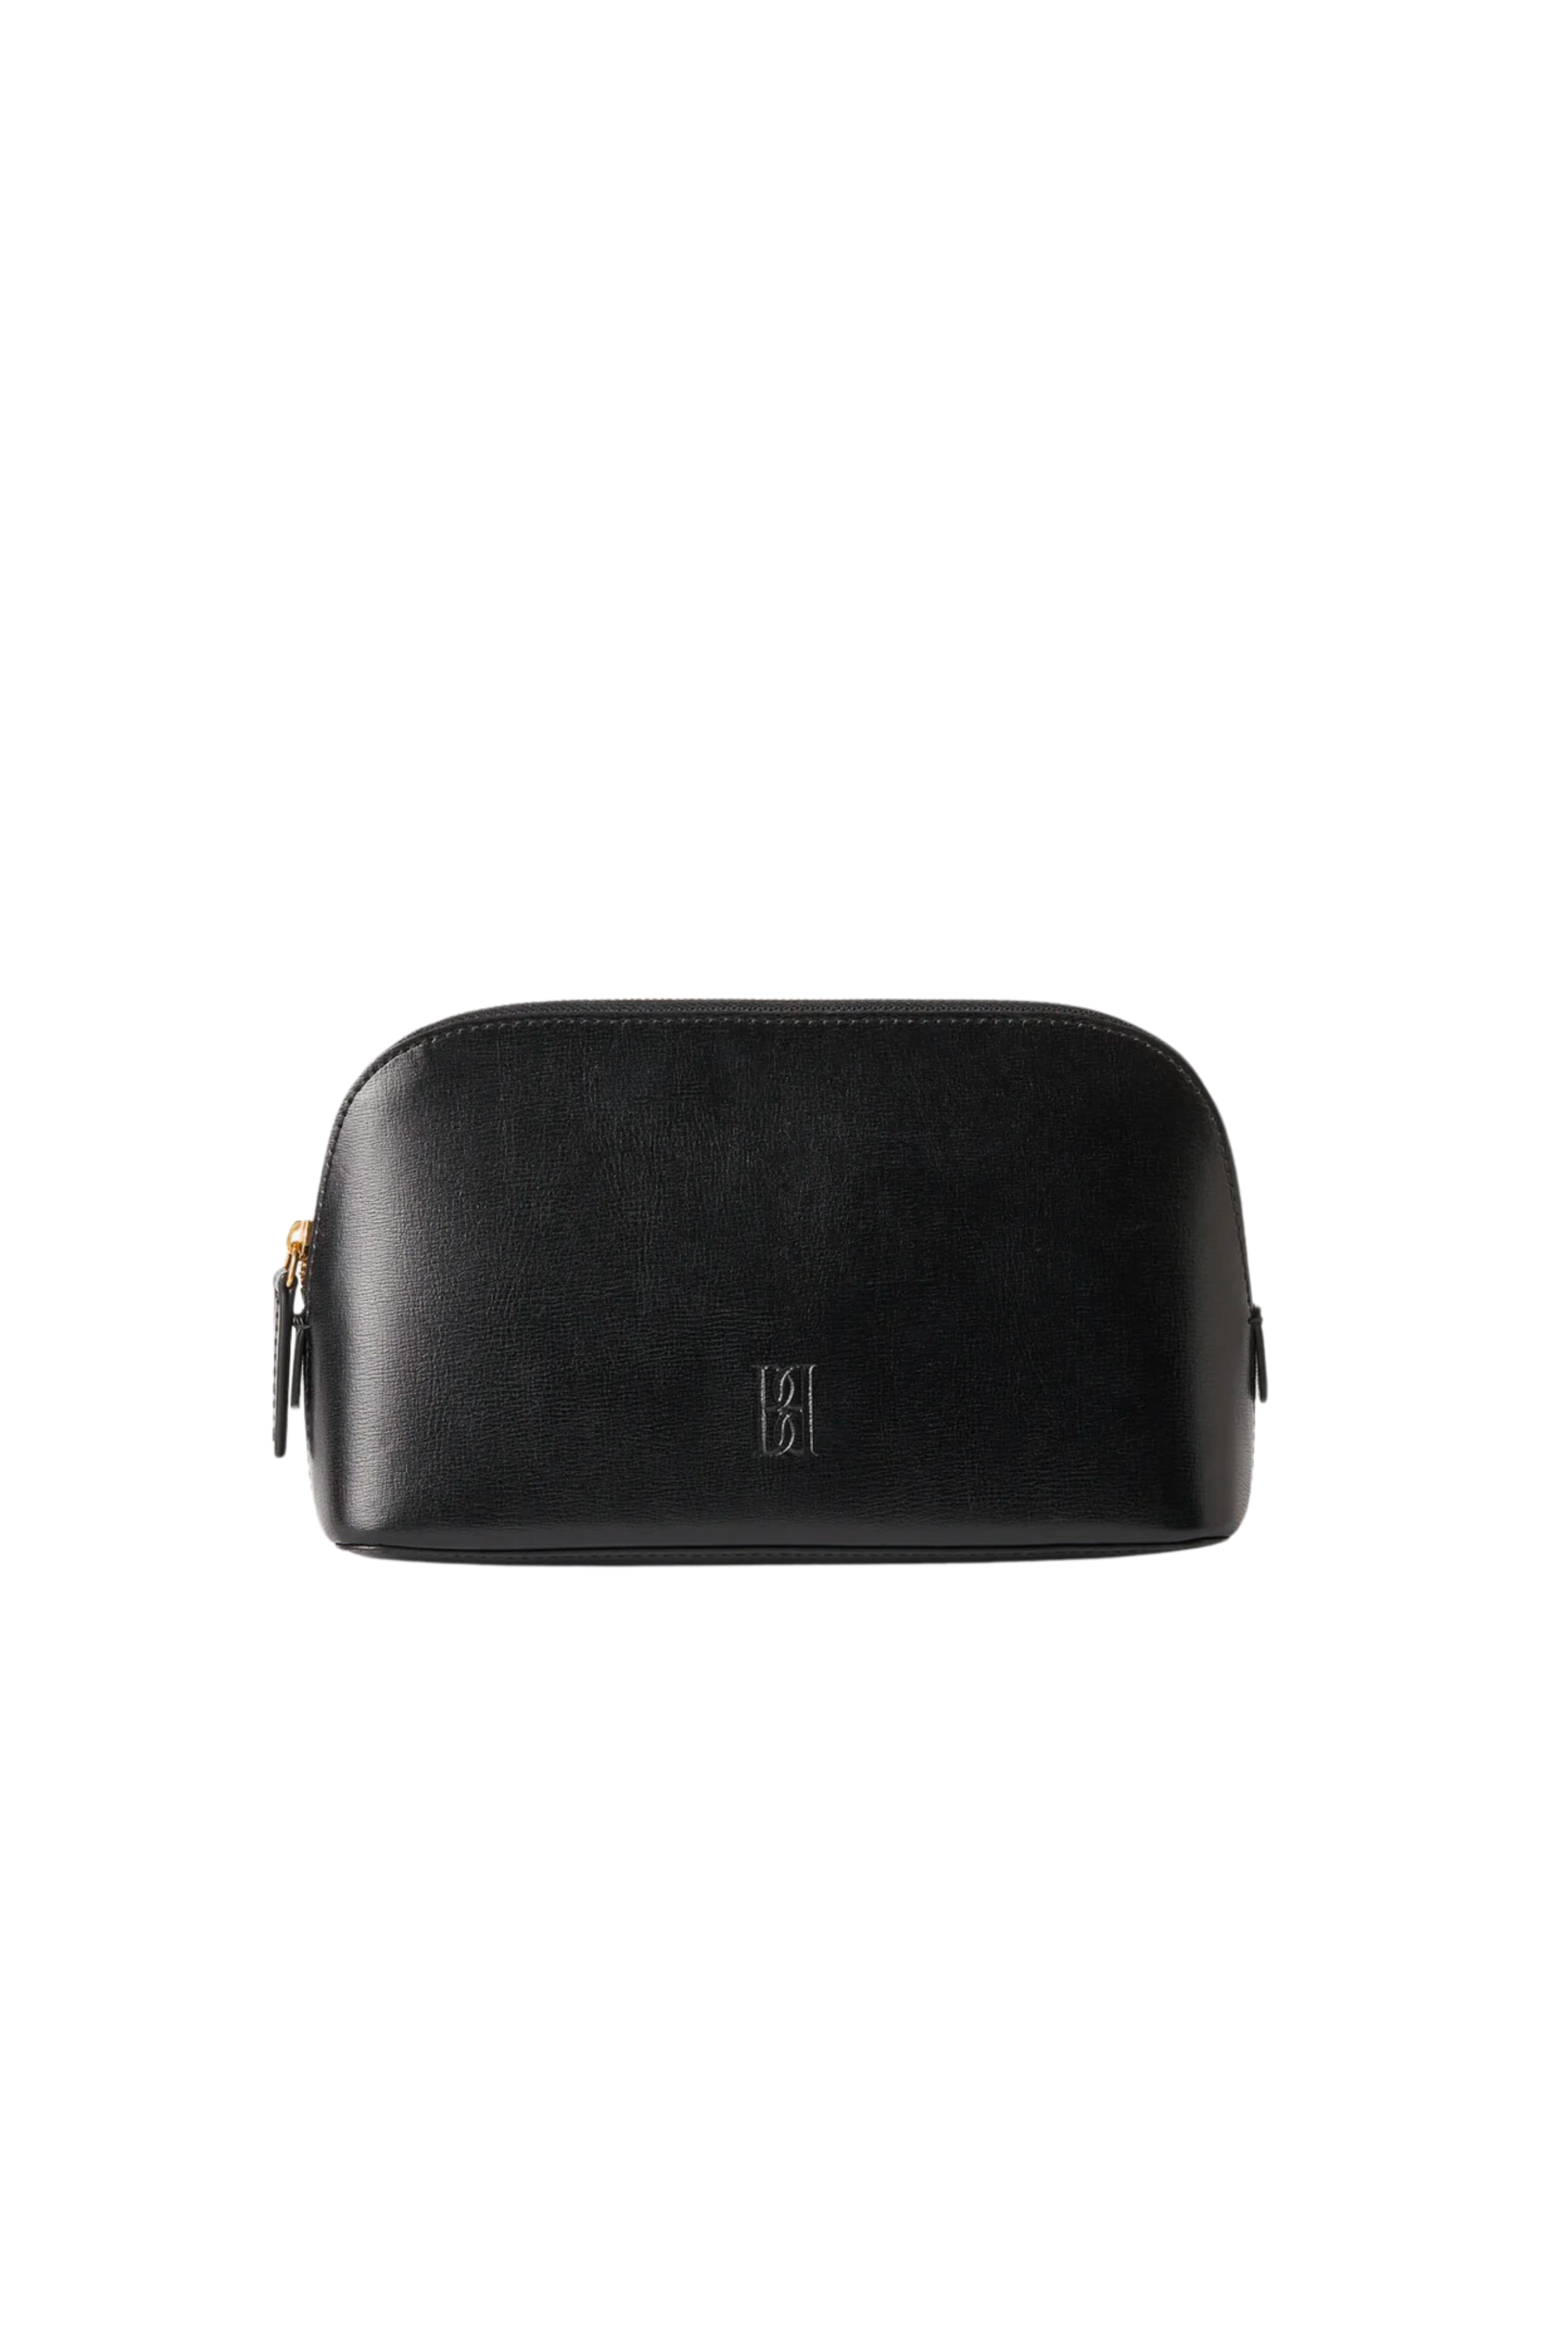 Aya Small Black Leather Makeup Travel Pouch